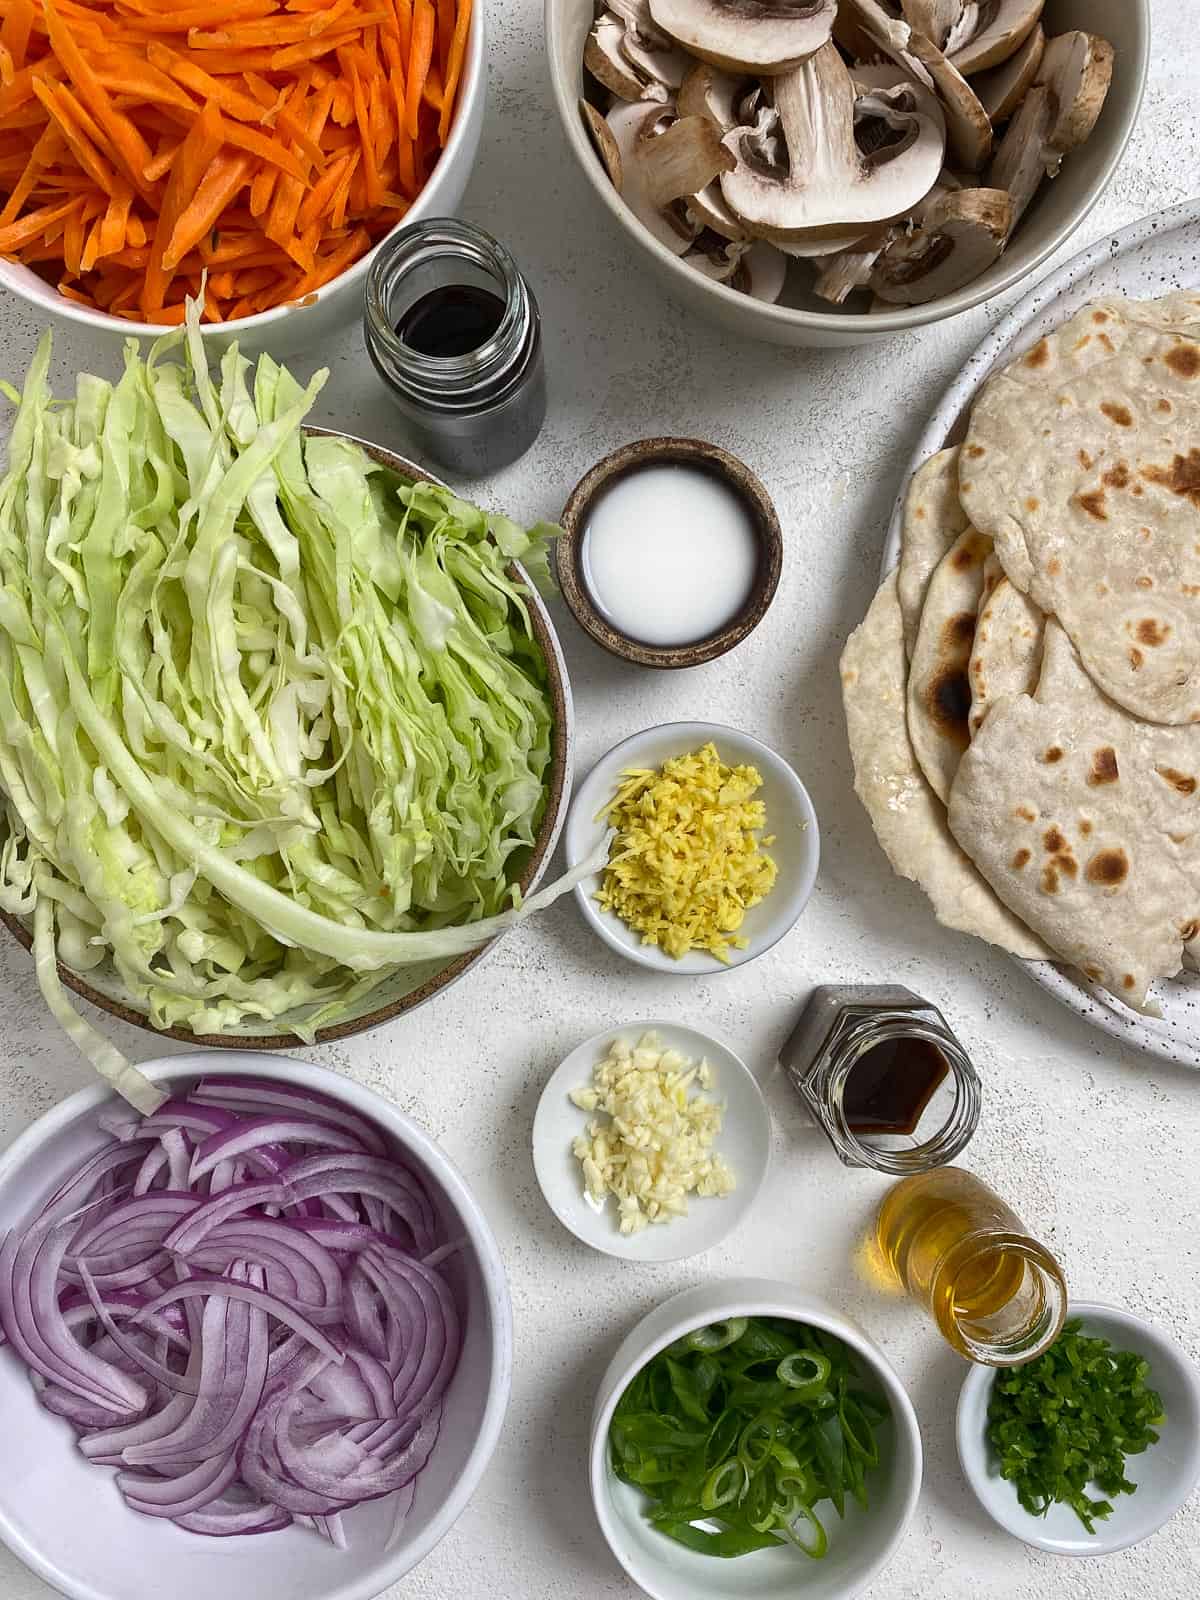 Moo Shu Vegetable ingredients measured out against a white surface